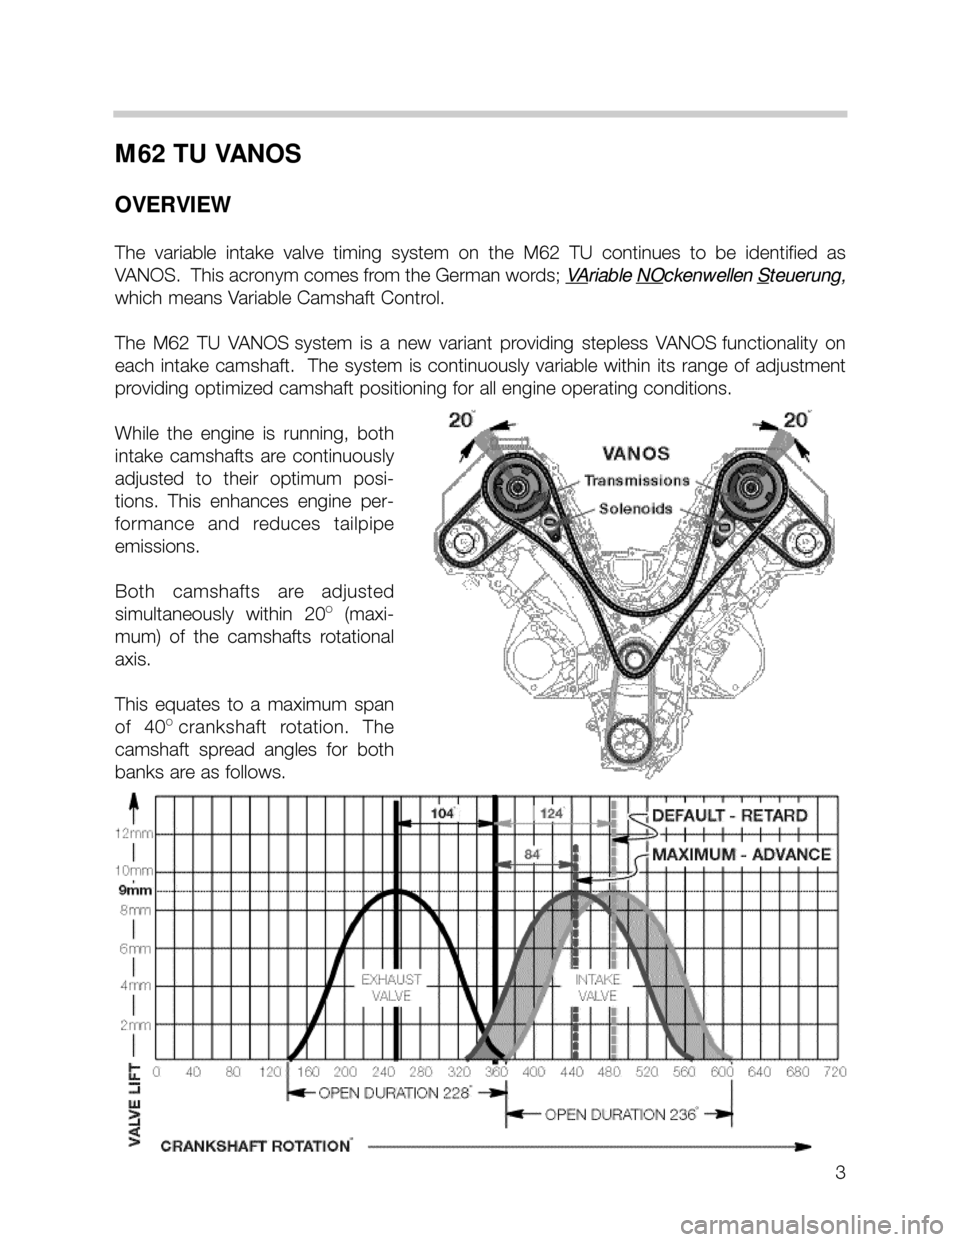 BMW X5 2005 E53 M62TU Engine Workshop Manual 3
M62 TU VANOS
OVERVIEW
The  variable  intake  valve  timing  system  on  the  M62  TU  continues  to  be  identified  as
VANOS.  This acronym comes from the German words; V
Ariable NOckenwellen Steue